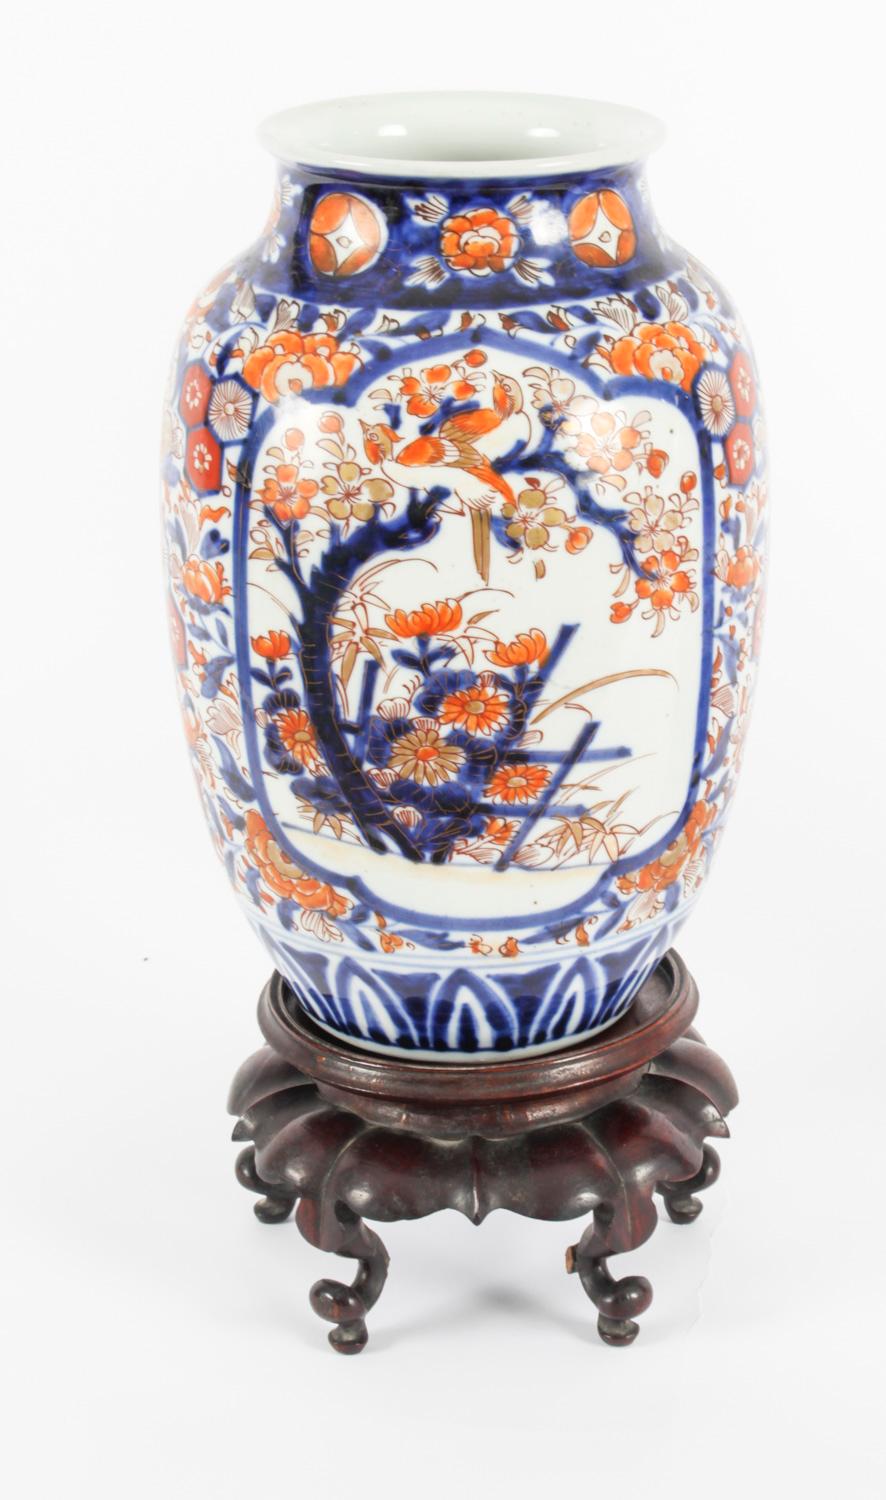 This is a decorative pair of Japanese Imari jars on stands, circa 1870 in date.
 
The pair of bulbous shape vases feature matching stunning Japanese decoration in the traditional Imari colour scheme of orange, blue and white with hand finished